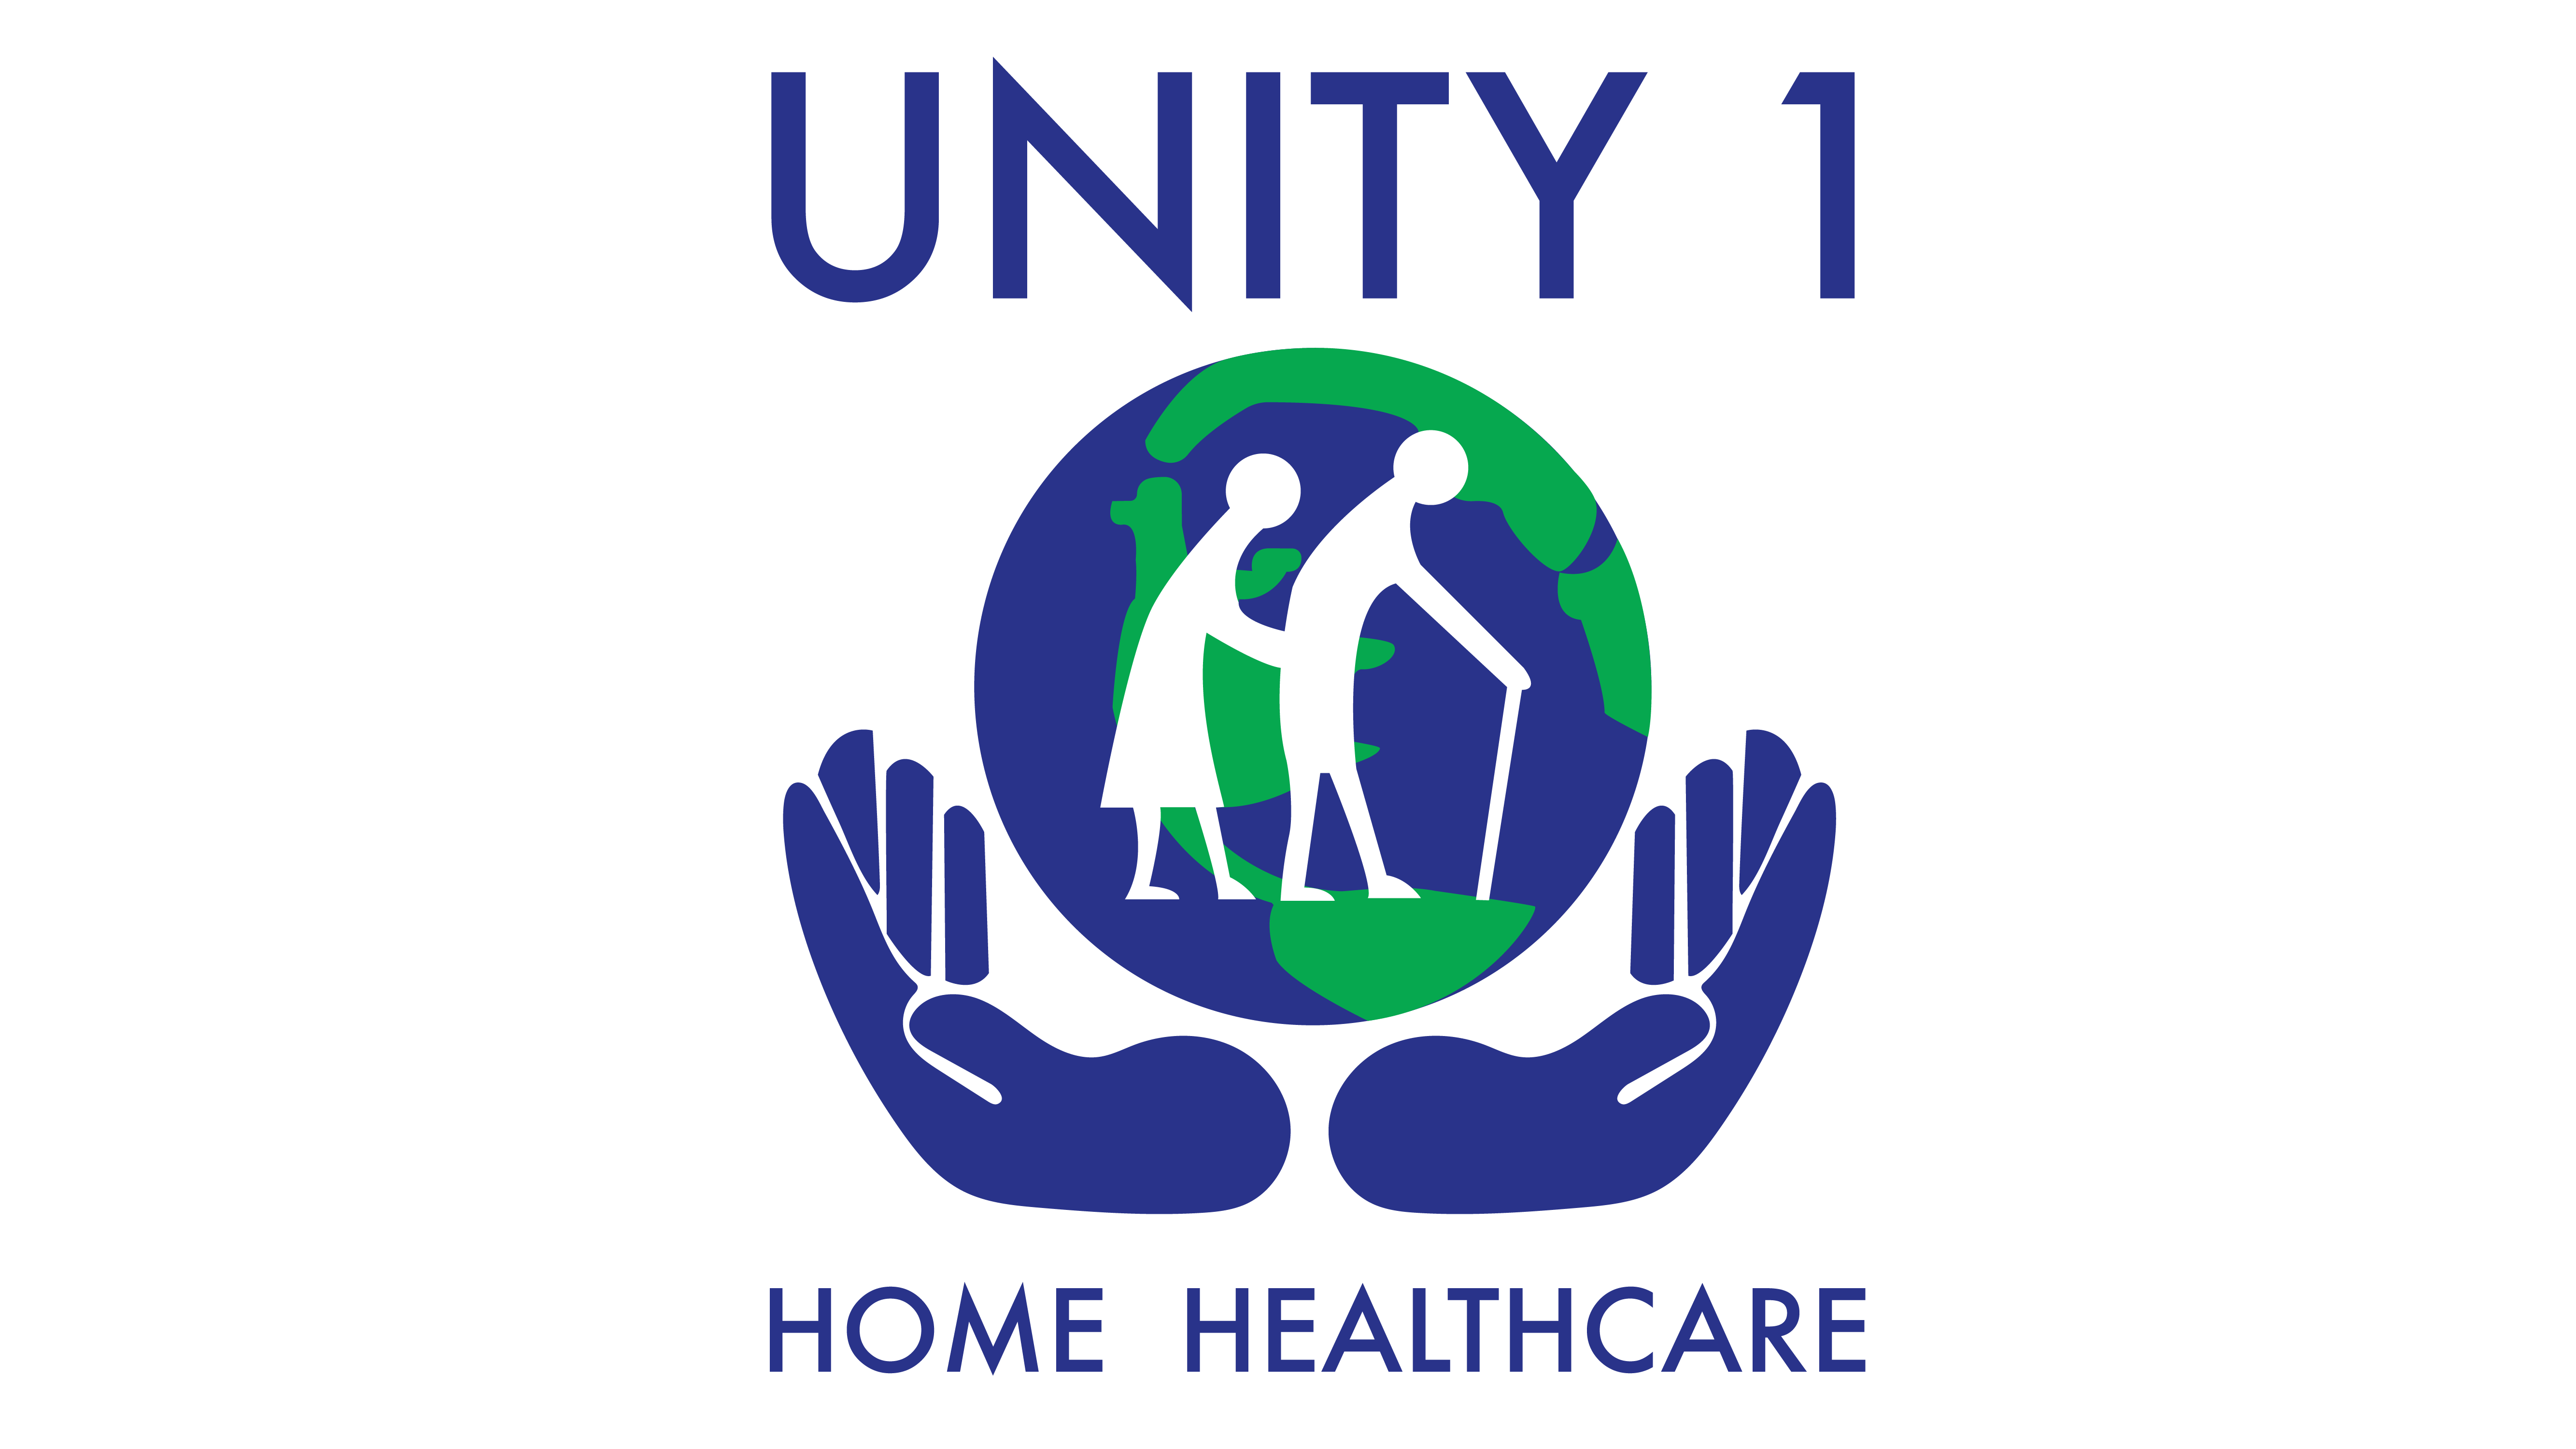 Unity 1 Home Healthcare in Portsmouth OH